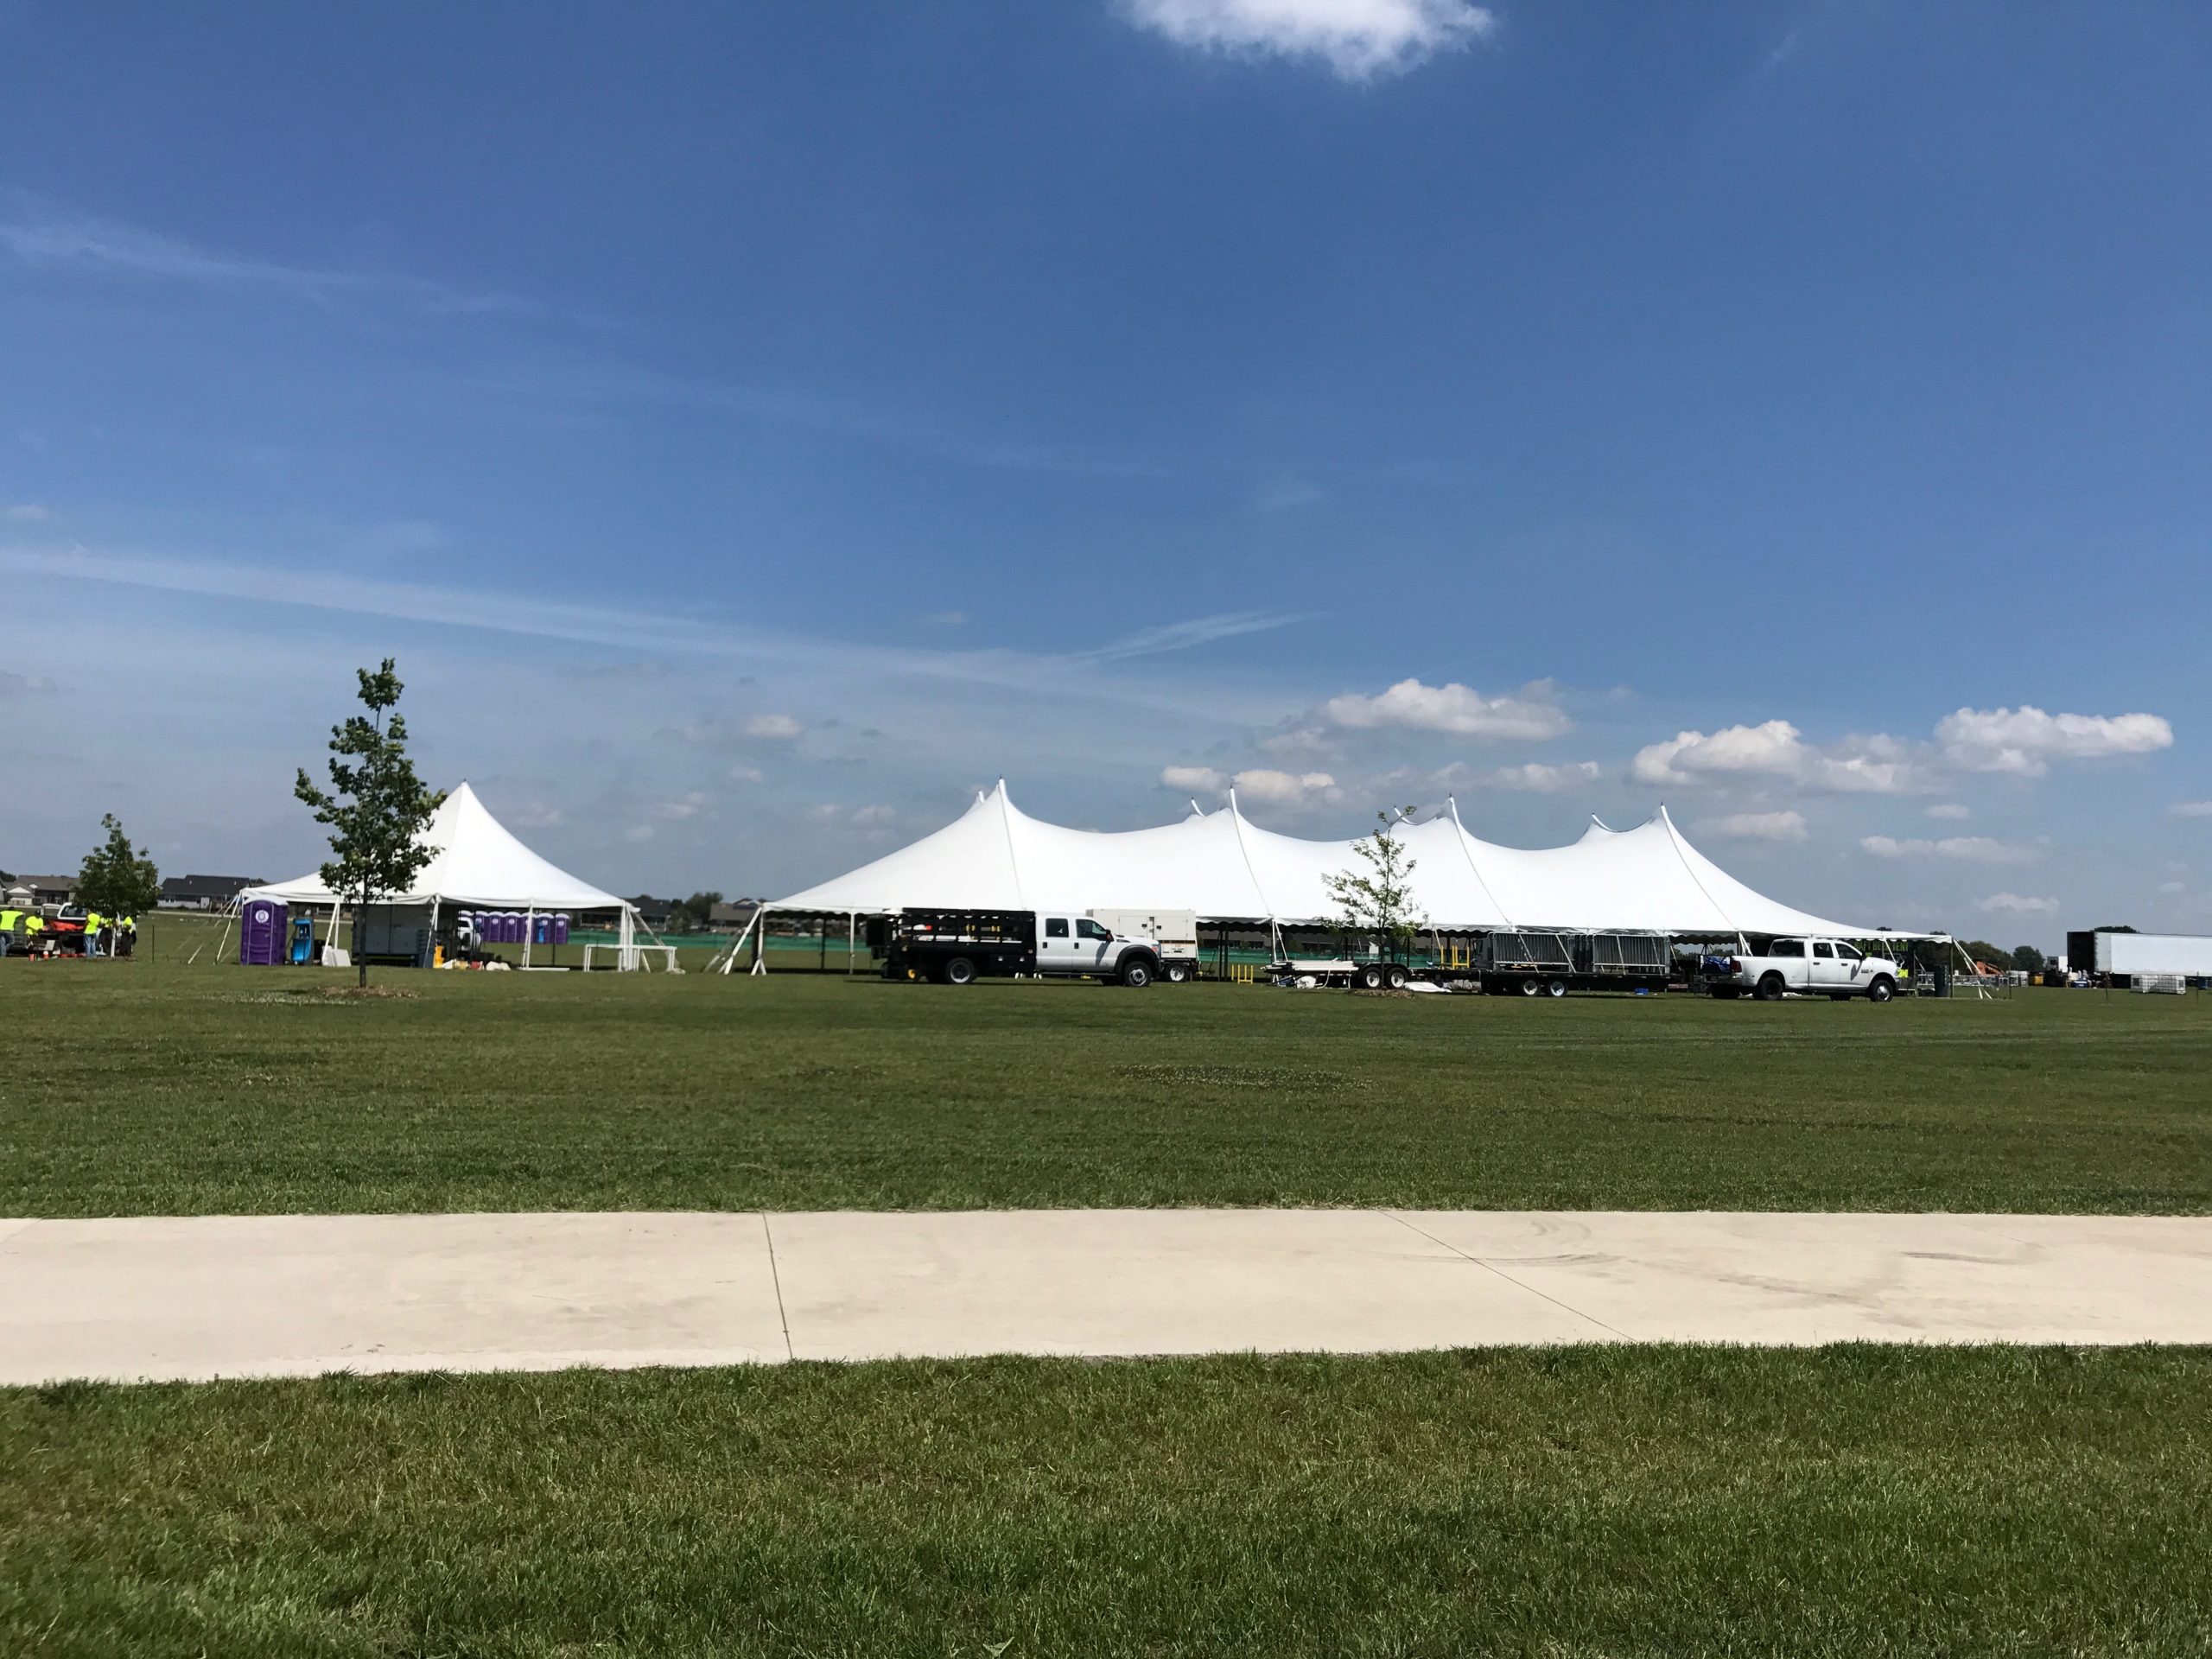 View of rope and pole tents at the North Liberty Blues & BBQ festival at Centennial Park in North Liberty, Iowa